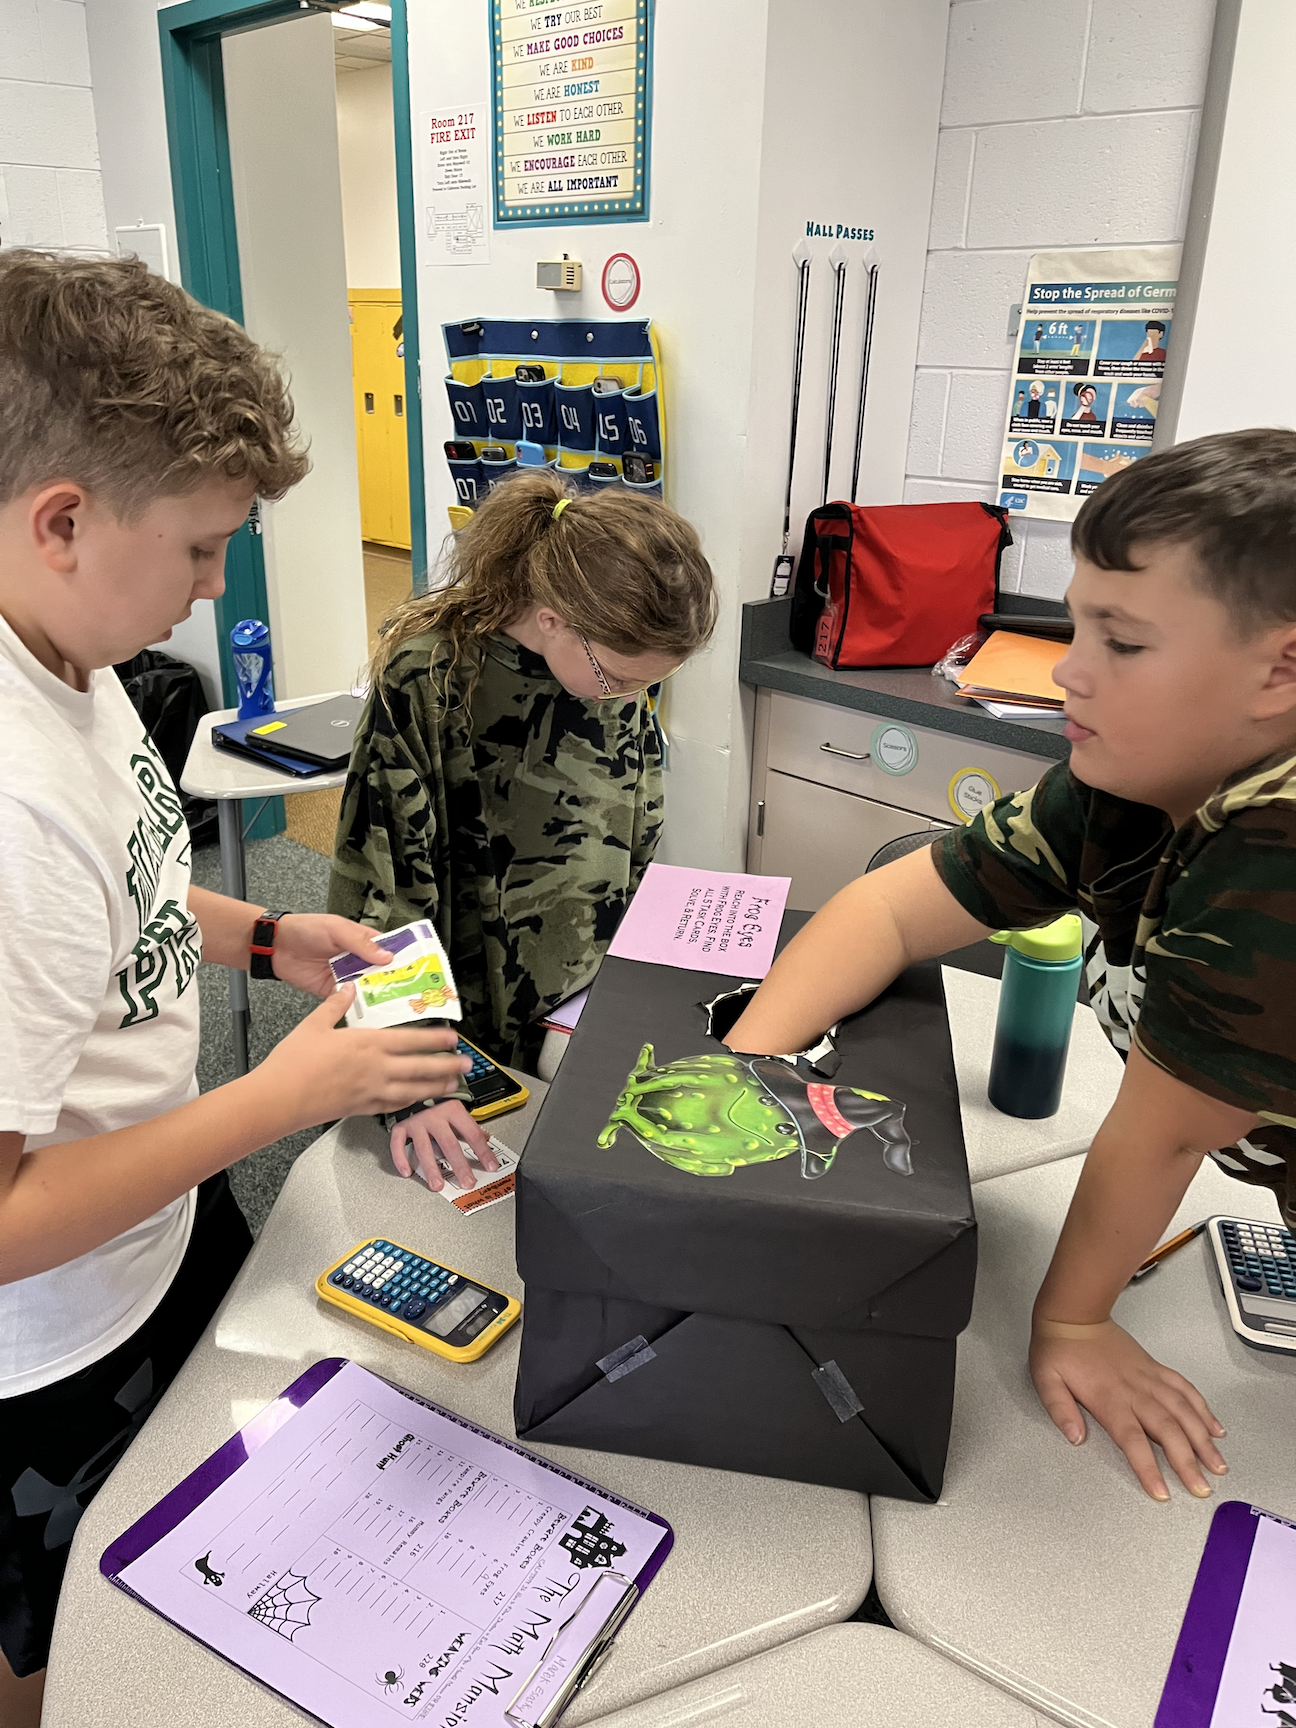 6th-graders Marek Esasky, Ezza Lapcevic, and Nolan Yeager search for math problems in the Beware Boxes